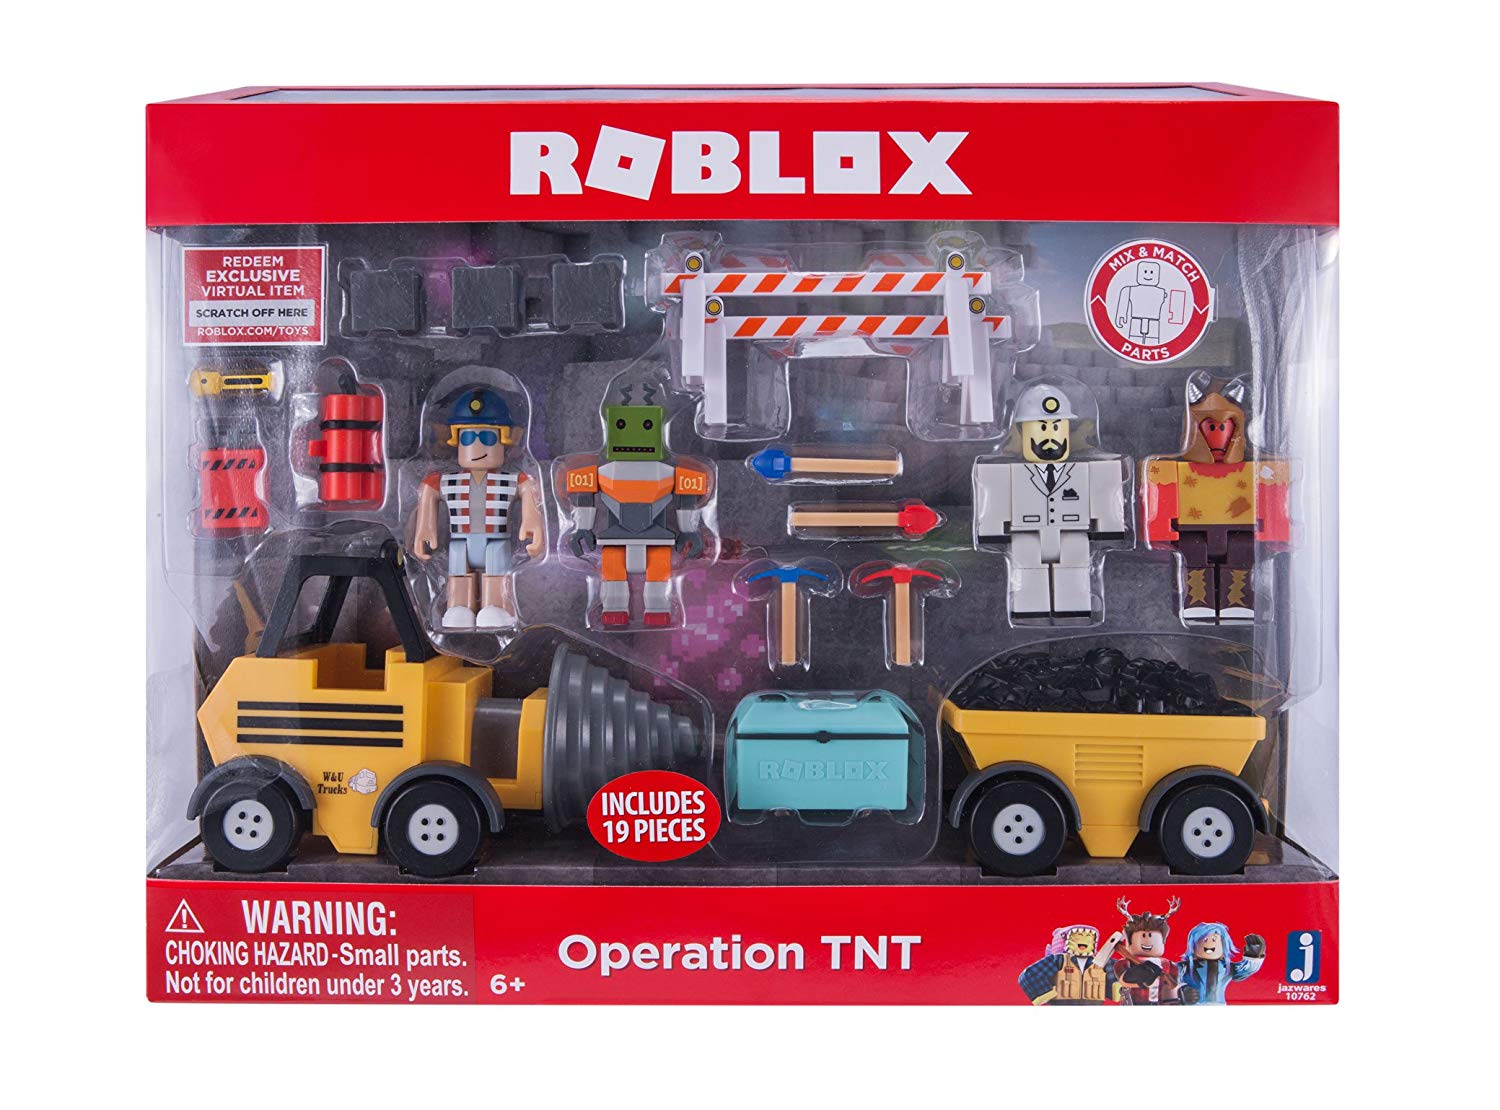 15 Best Roblox Toys The Ultimate List 2021 Heavy Com - roblox games with trucks in them